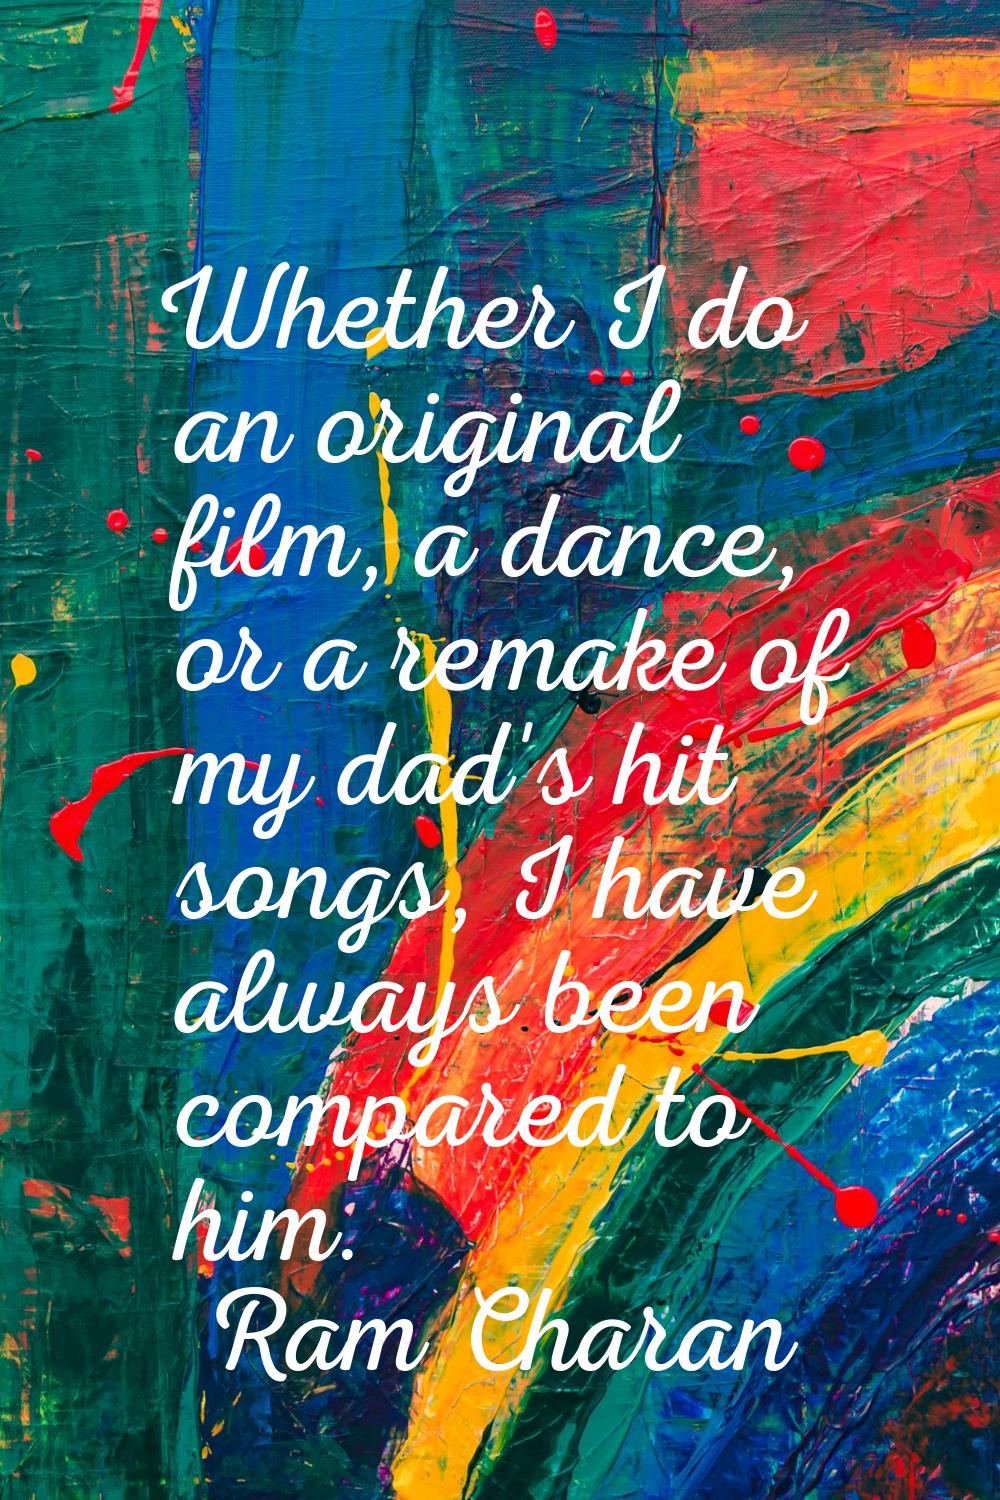 Whether I do an original film, a dance, or a remake of my dad's hit songs, I have always been compa